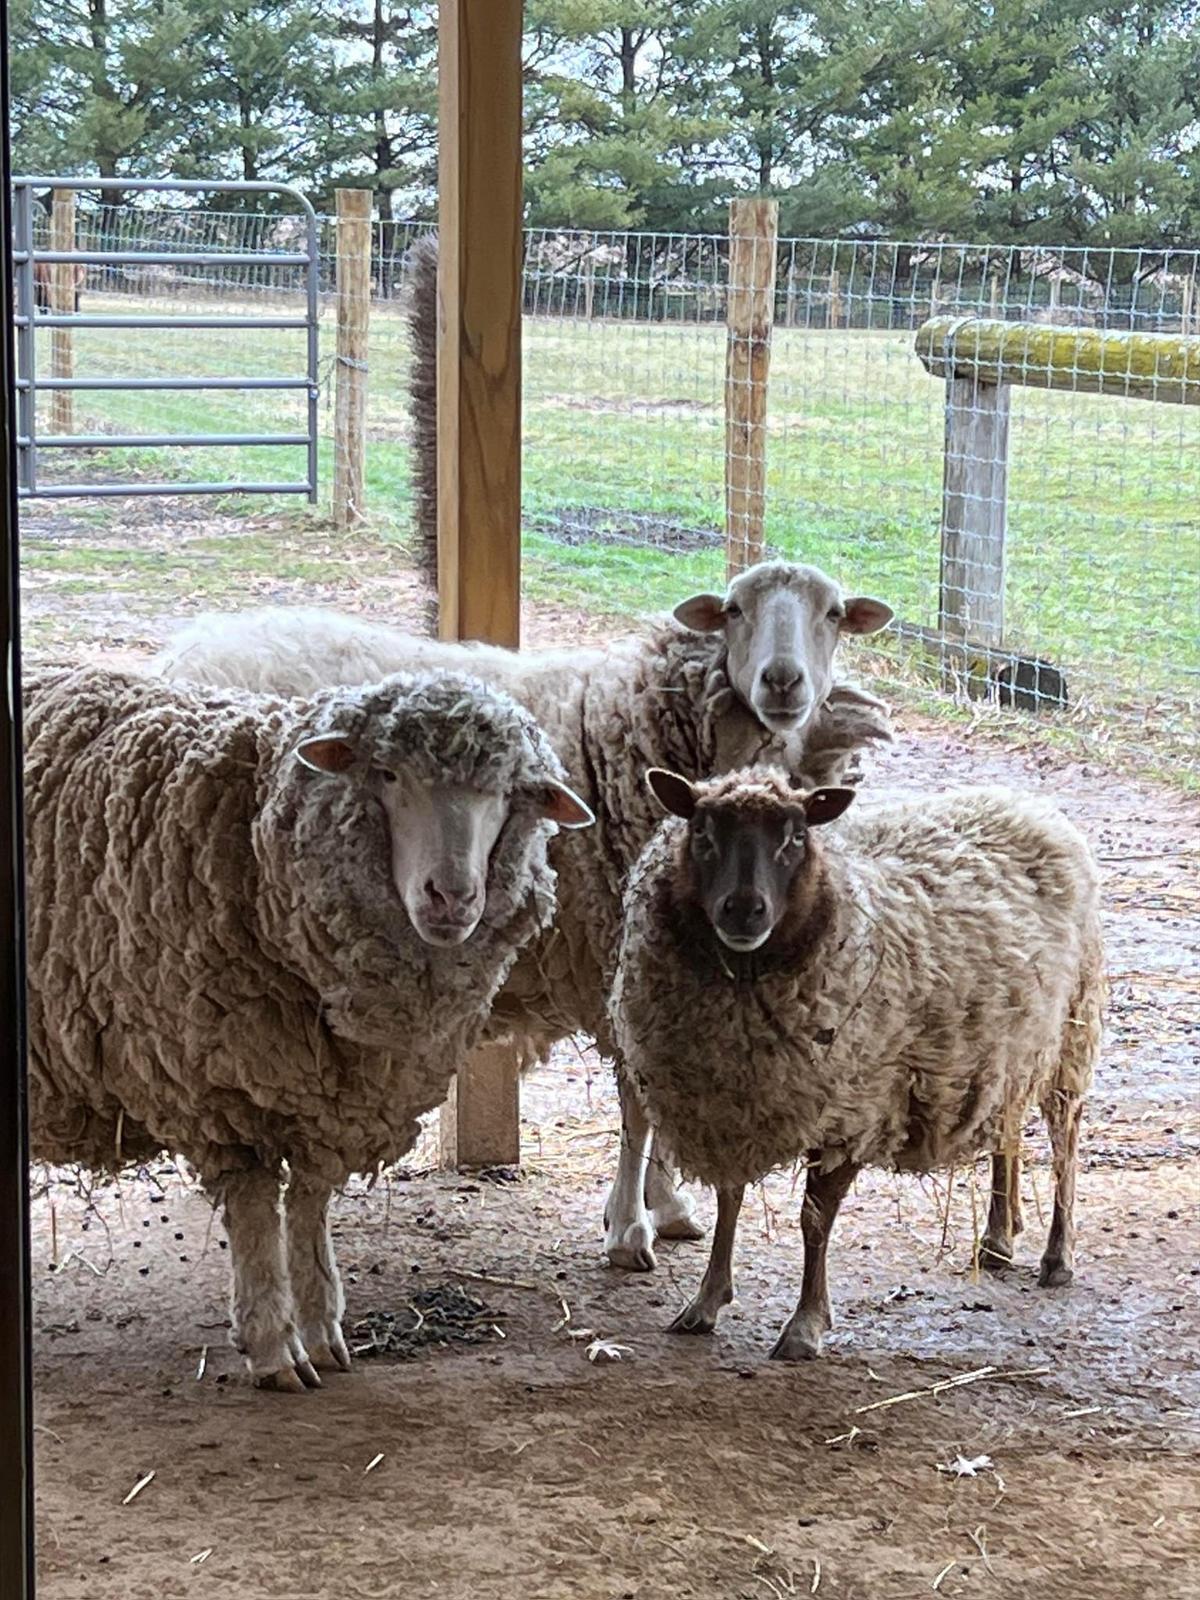 Ellie Mae (L) with her sanctuary friends Yammy (C) and Bella in April this year. (Courtesy of <a href="https://www.facebook.com/HarmonyHillFarmIL">Harmony Hill Farm Sanctuary</a>)